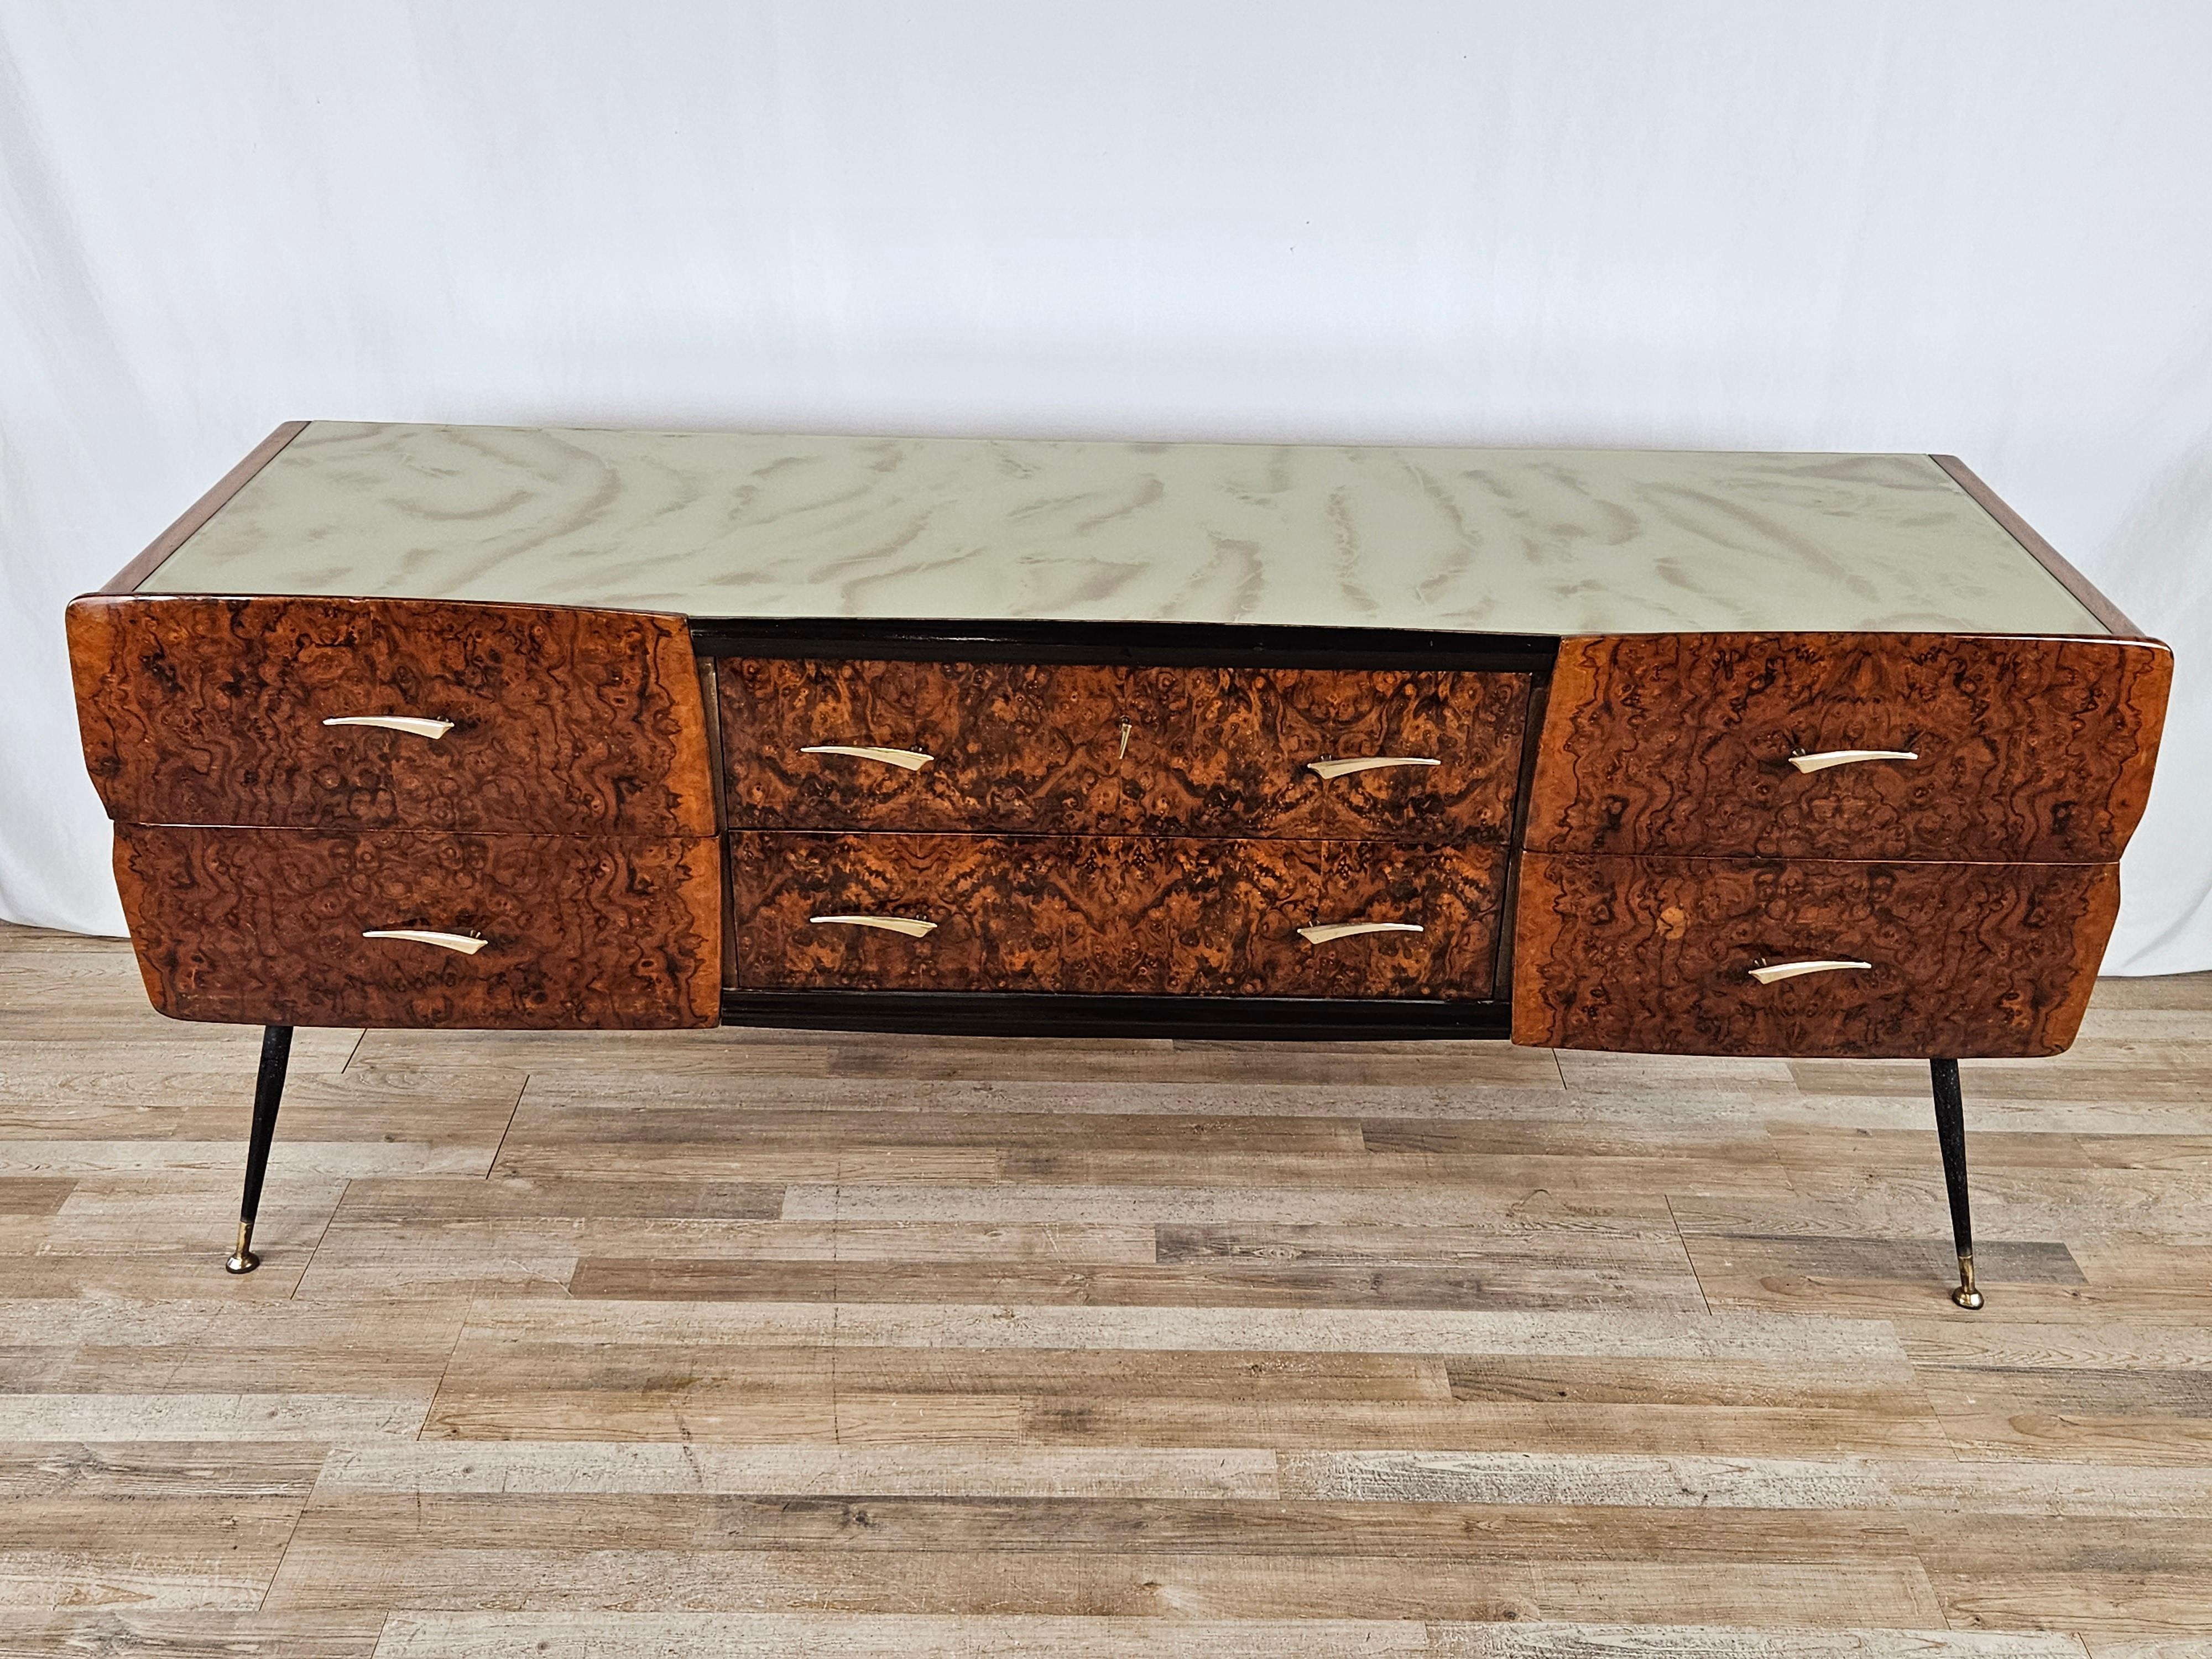 Modern bedroom chest of drawers made of mahogany burl, 1950s Italian production of high quality and workmanship.

The cabinet is made of mahogany with a distinctive worked and decorated glass top, note the iron spiked legs with brass ferrules and